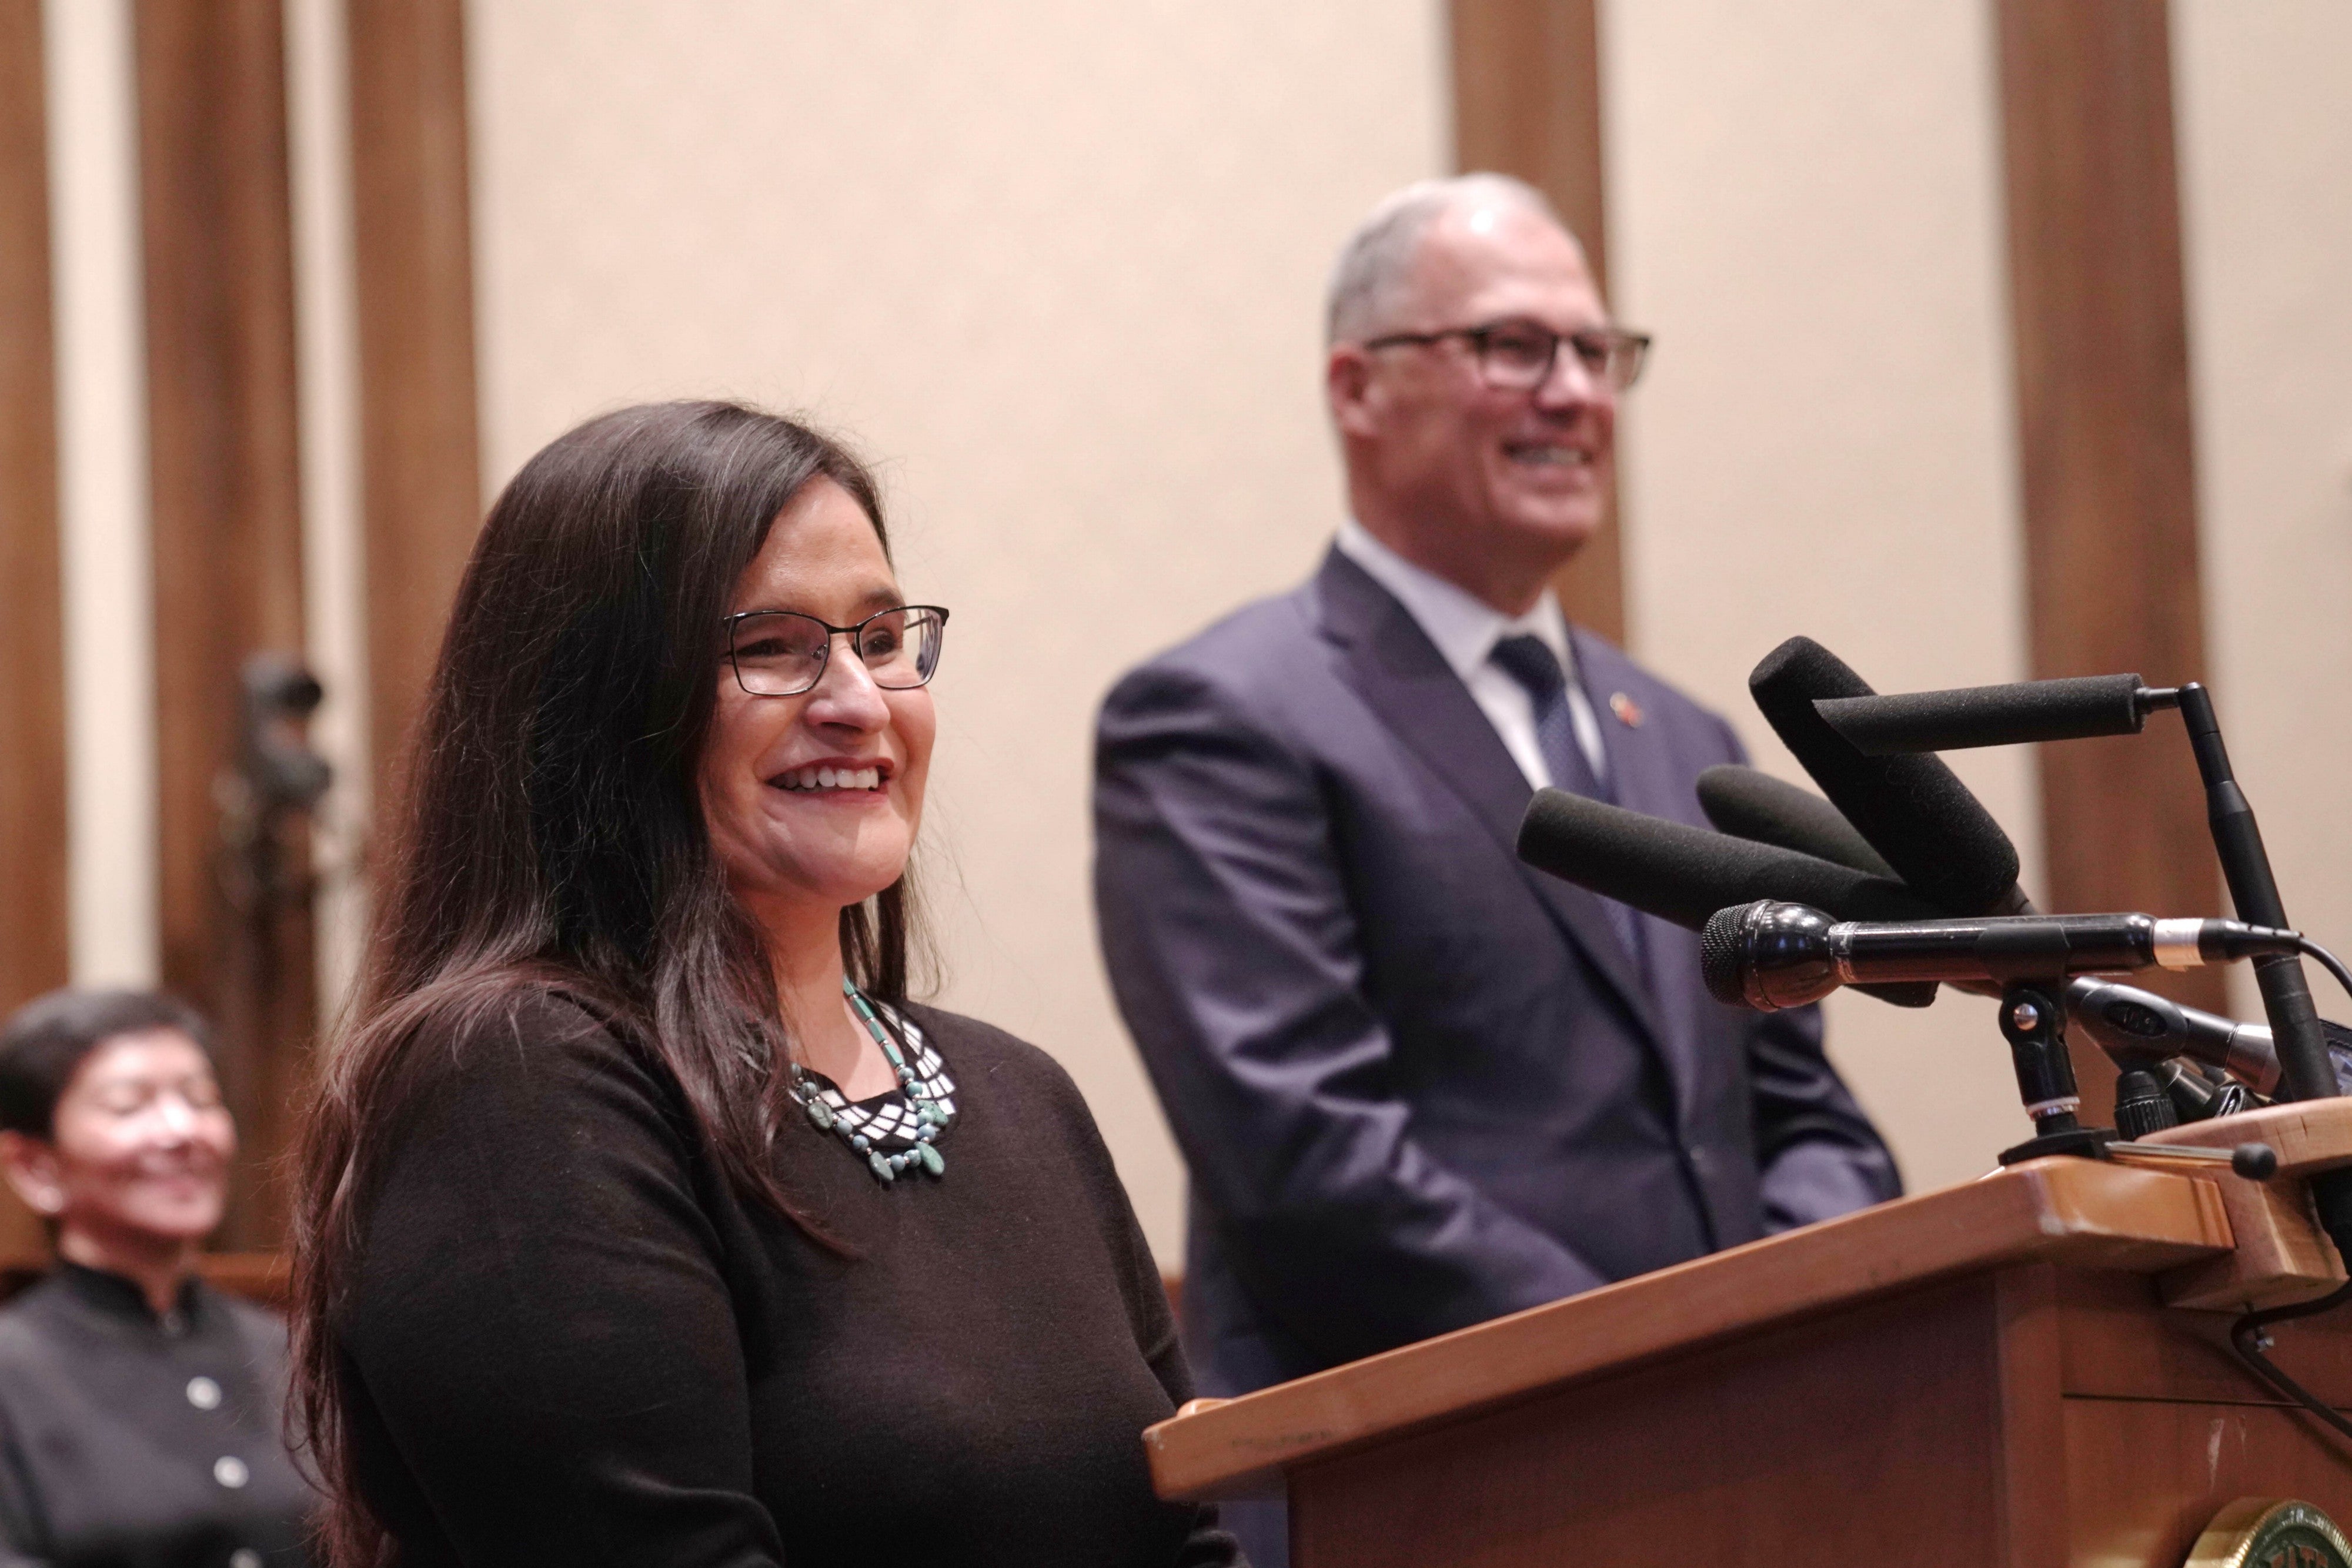 Raquel Montoya-Lewis smiles, standing at a podium next to Jay Inslee as he announces her appointment at a formal ceremony.